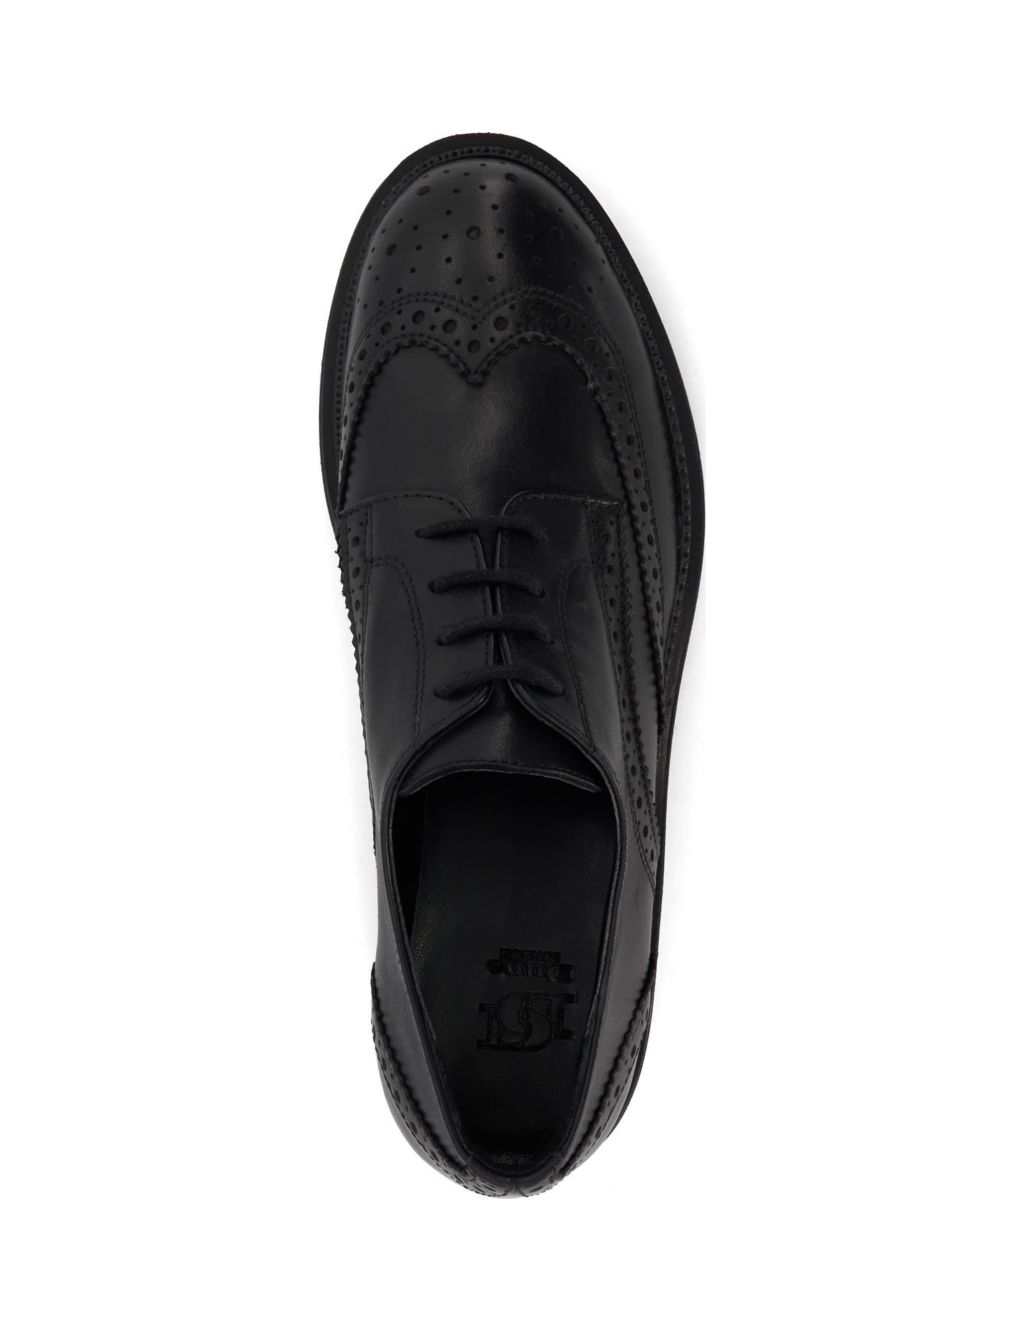 Leather Chunky Lace Up Brogues image 3